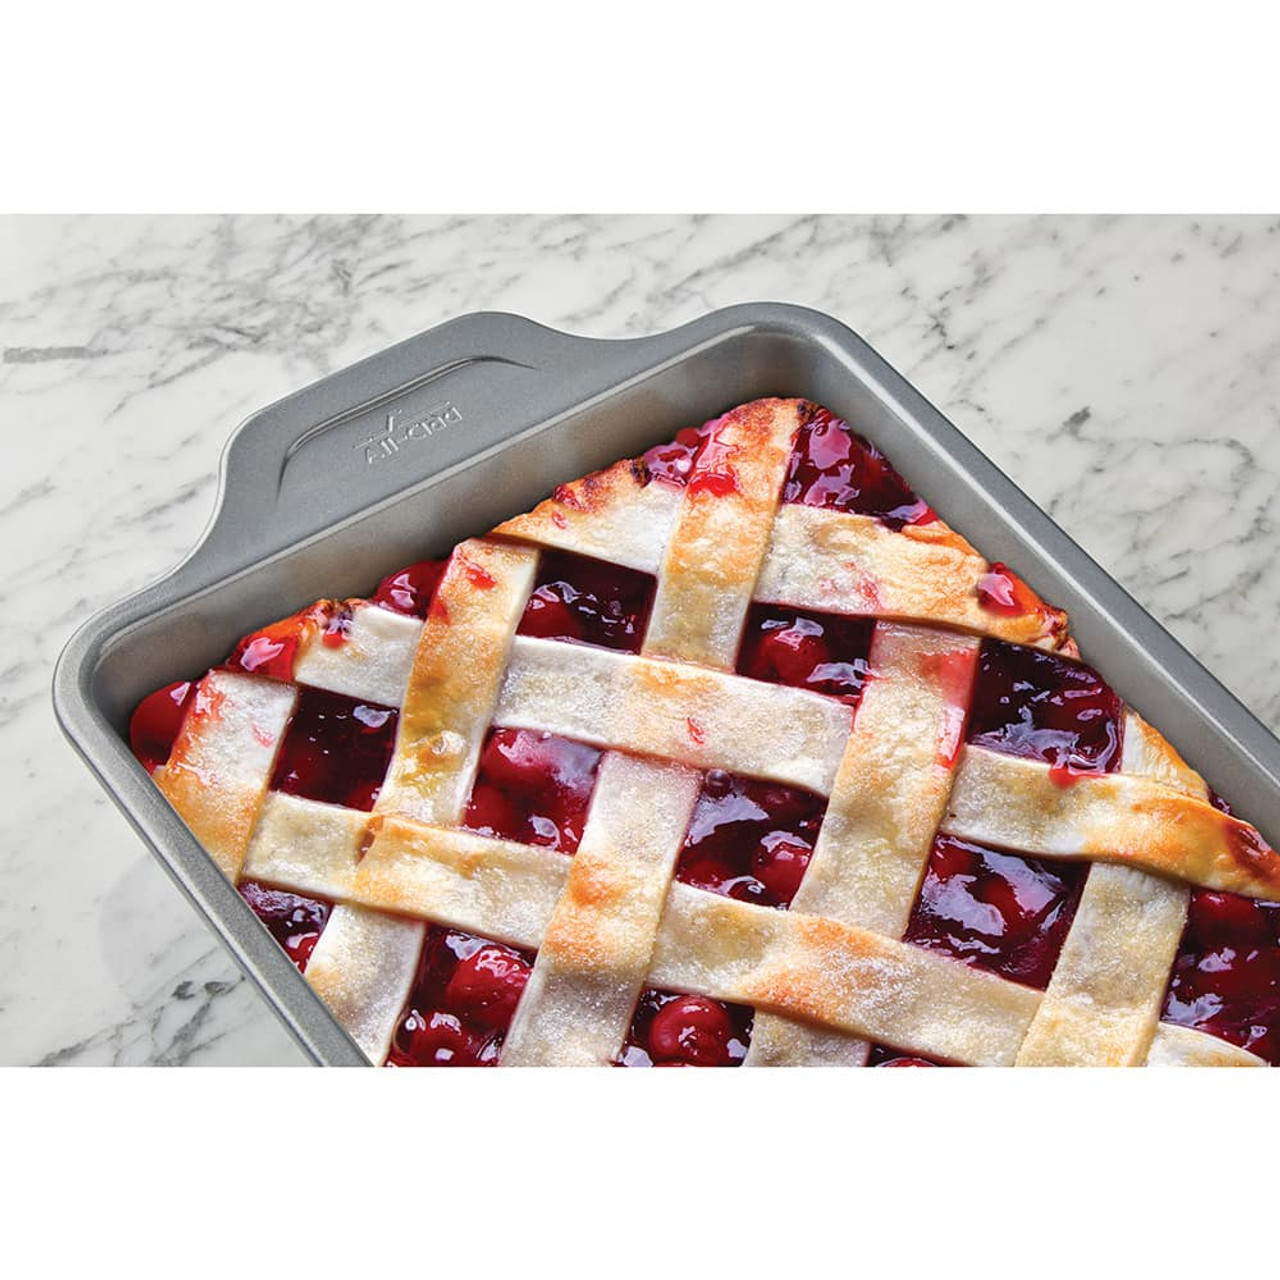 https://cdn11.bigcommerce.com/s-hccytny0od/images/stencil/1280x1280/products/3284/11753/all-clad-pro-release-rectangular-baking-pan-3__76066.1589538795.jpg?c=2?imbypass=on